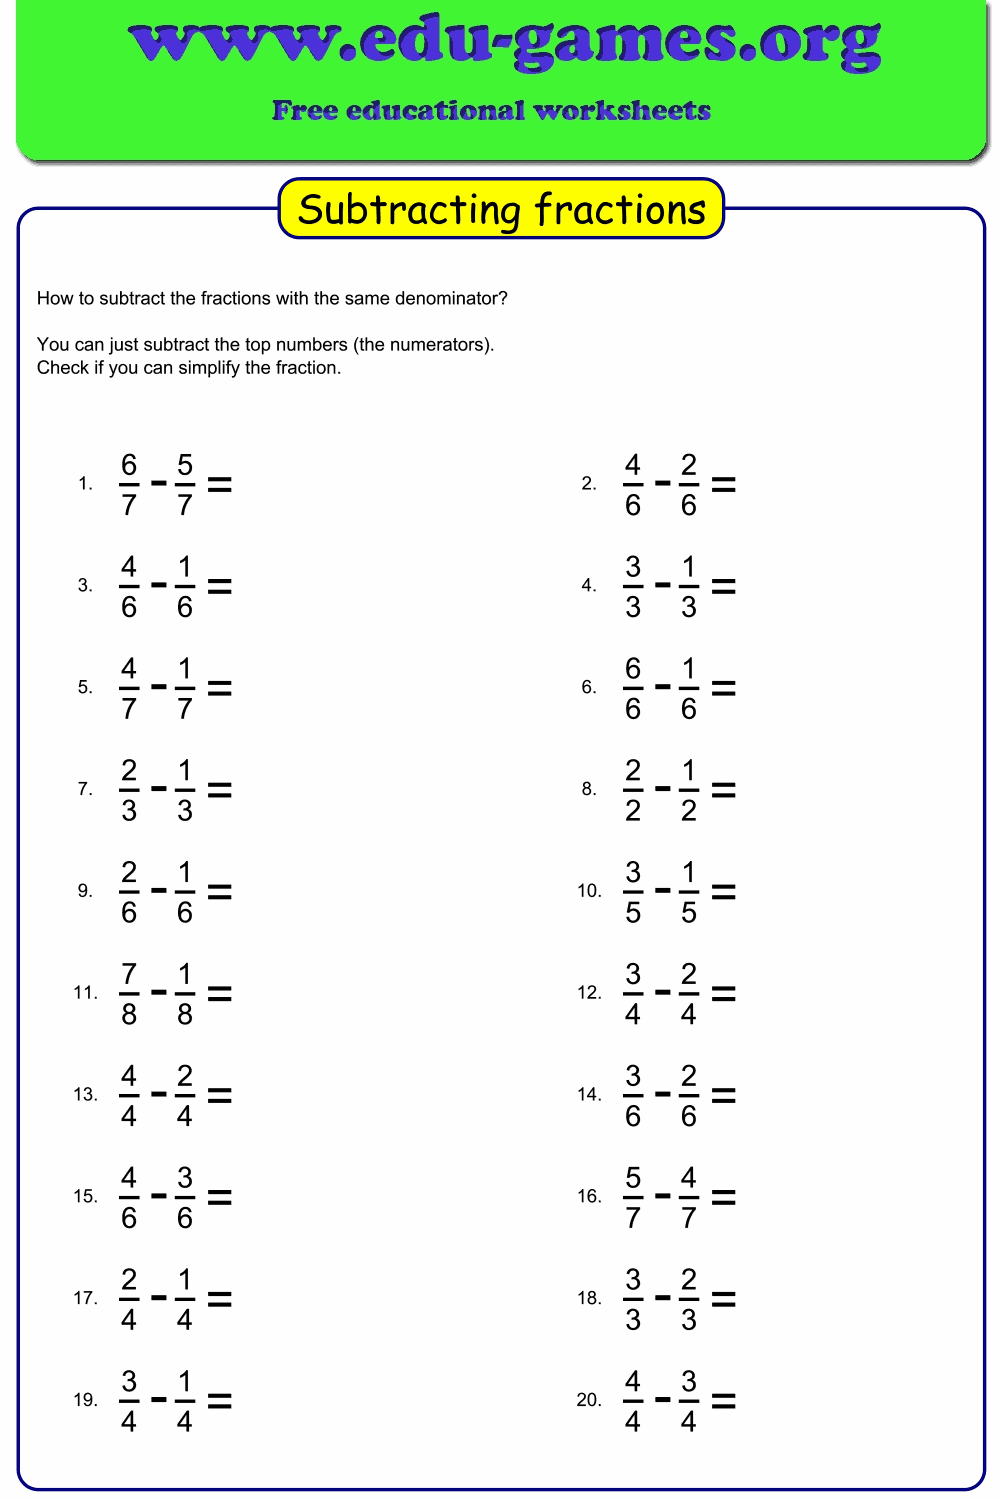 subtracting fractions with like denominators a subtracting fractions